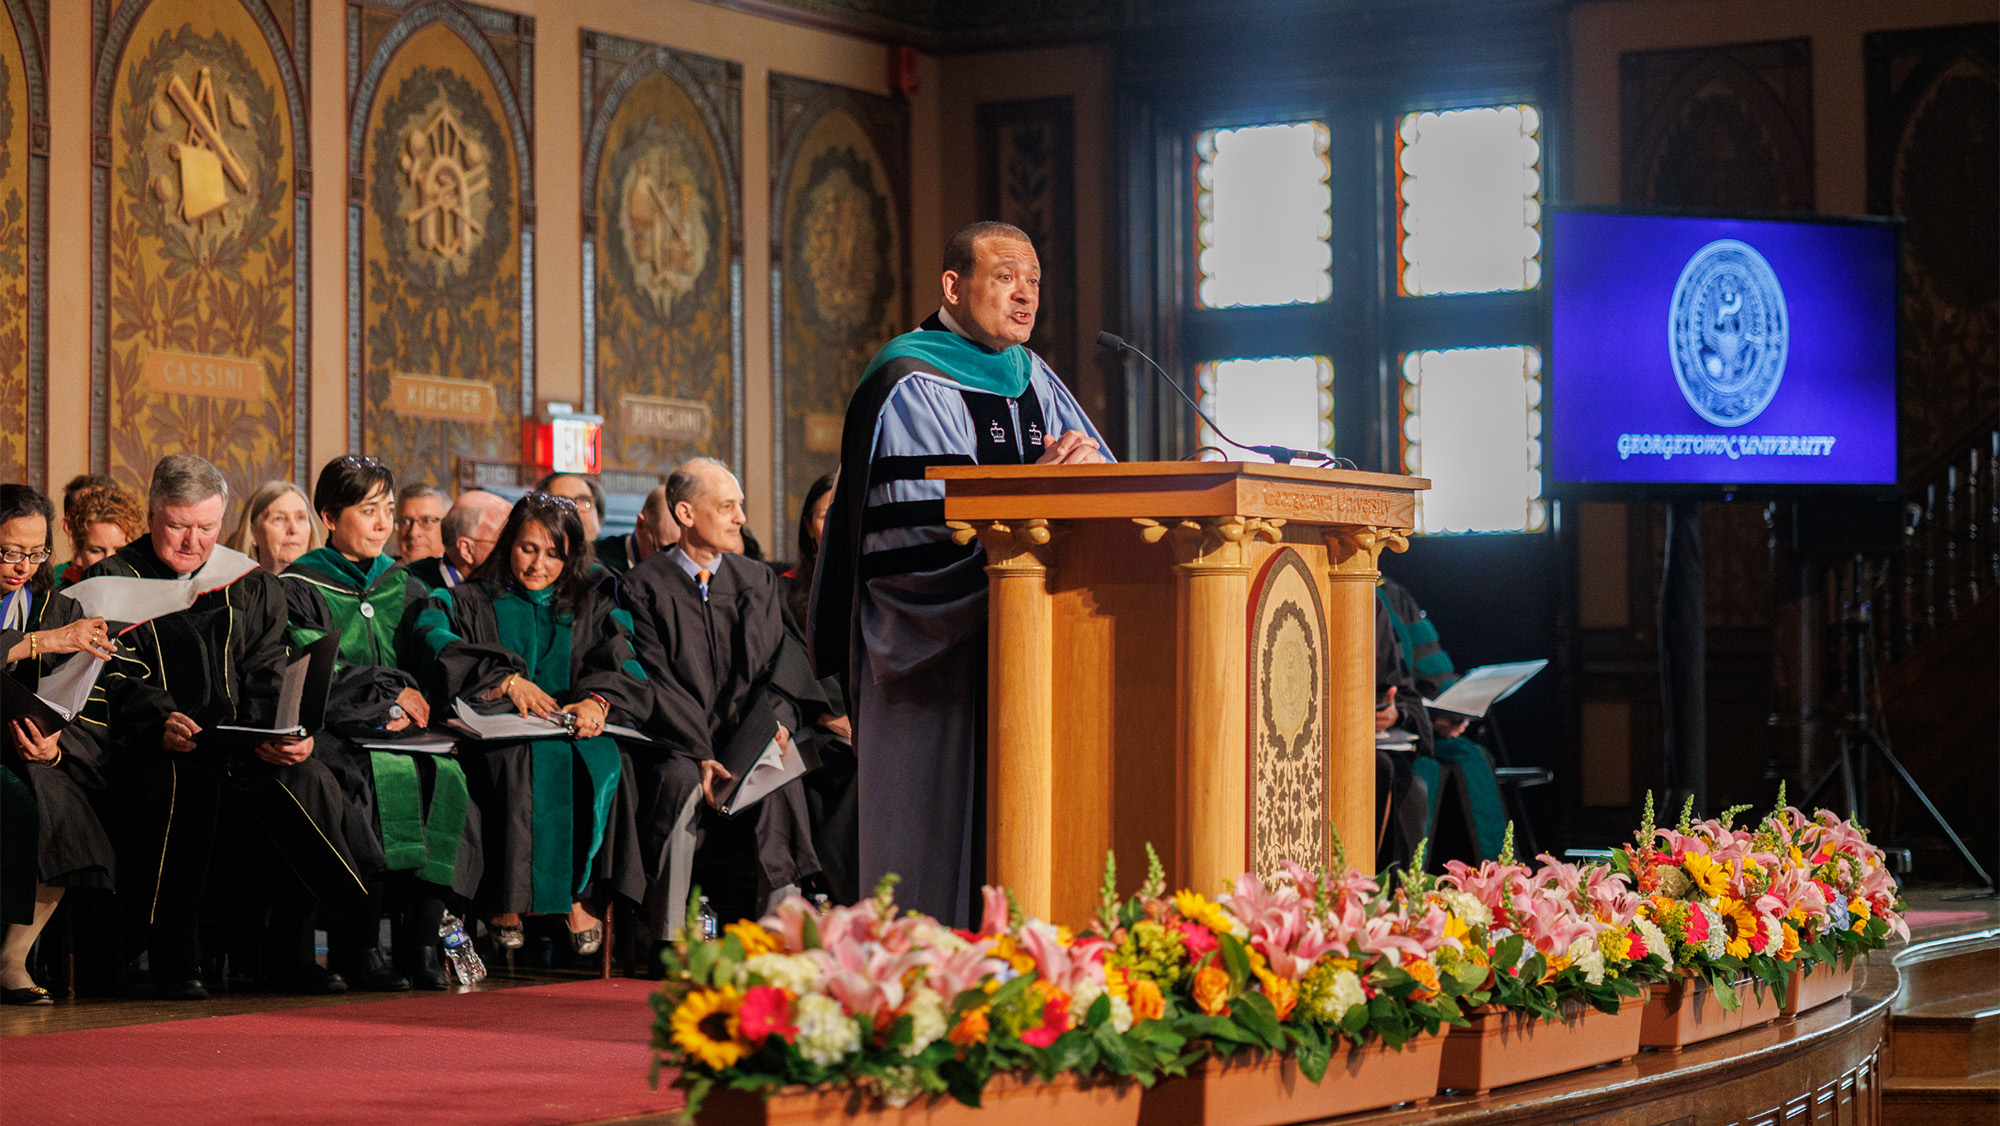 Dean Jones speaks from the stage in Gaston Hall, where faculty of the School of Medicine are seated